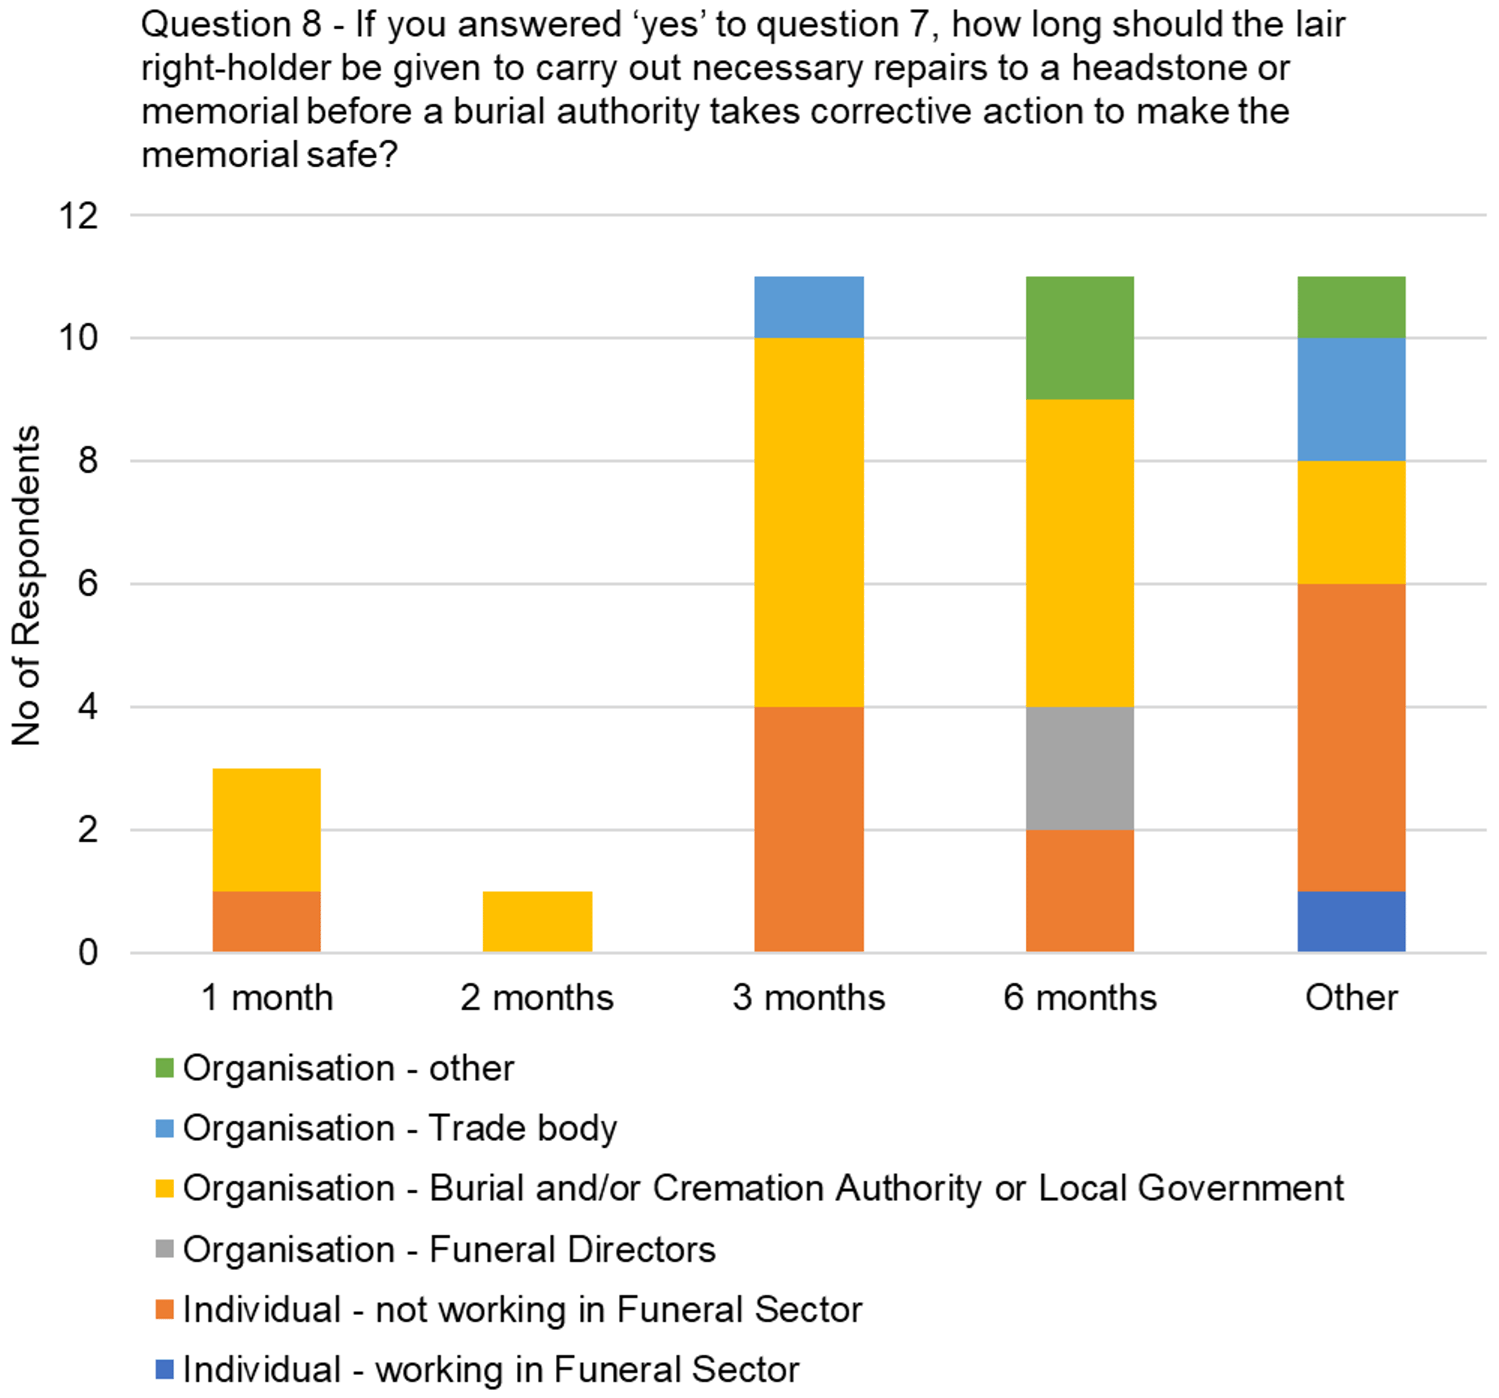 The graph visually presents the data from table 8, focussing on the responses to the question, "If you answered ‘yes’ to question 7, how long should the lair right-holder be given to carry out necessary repairs to a headstone or memorial before a burial authority takes corrective action to make the memorial safe?"